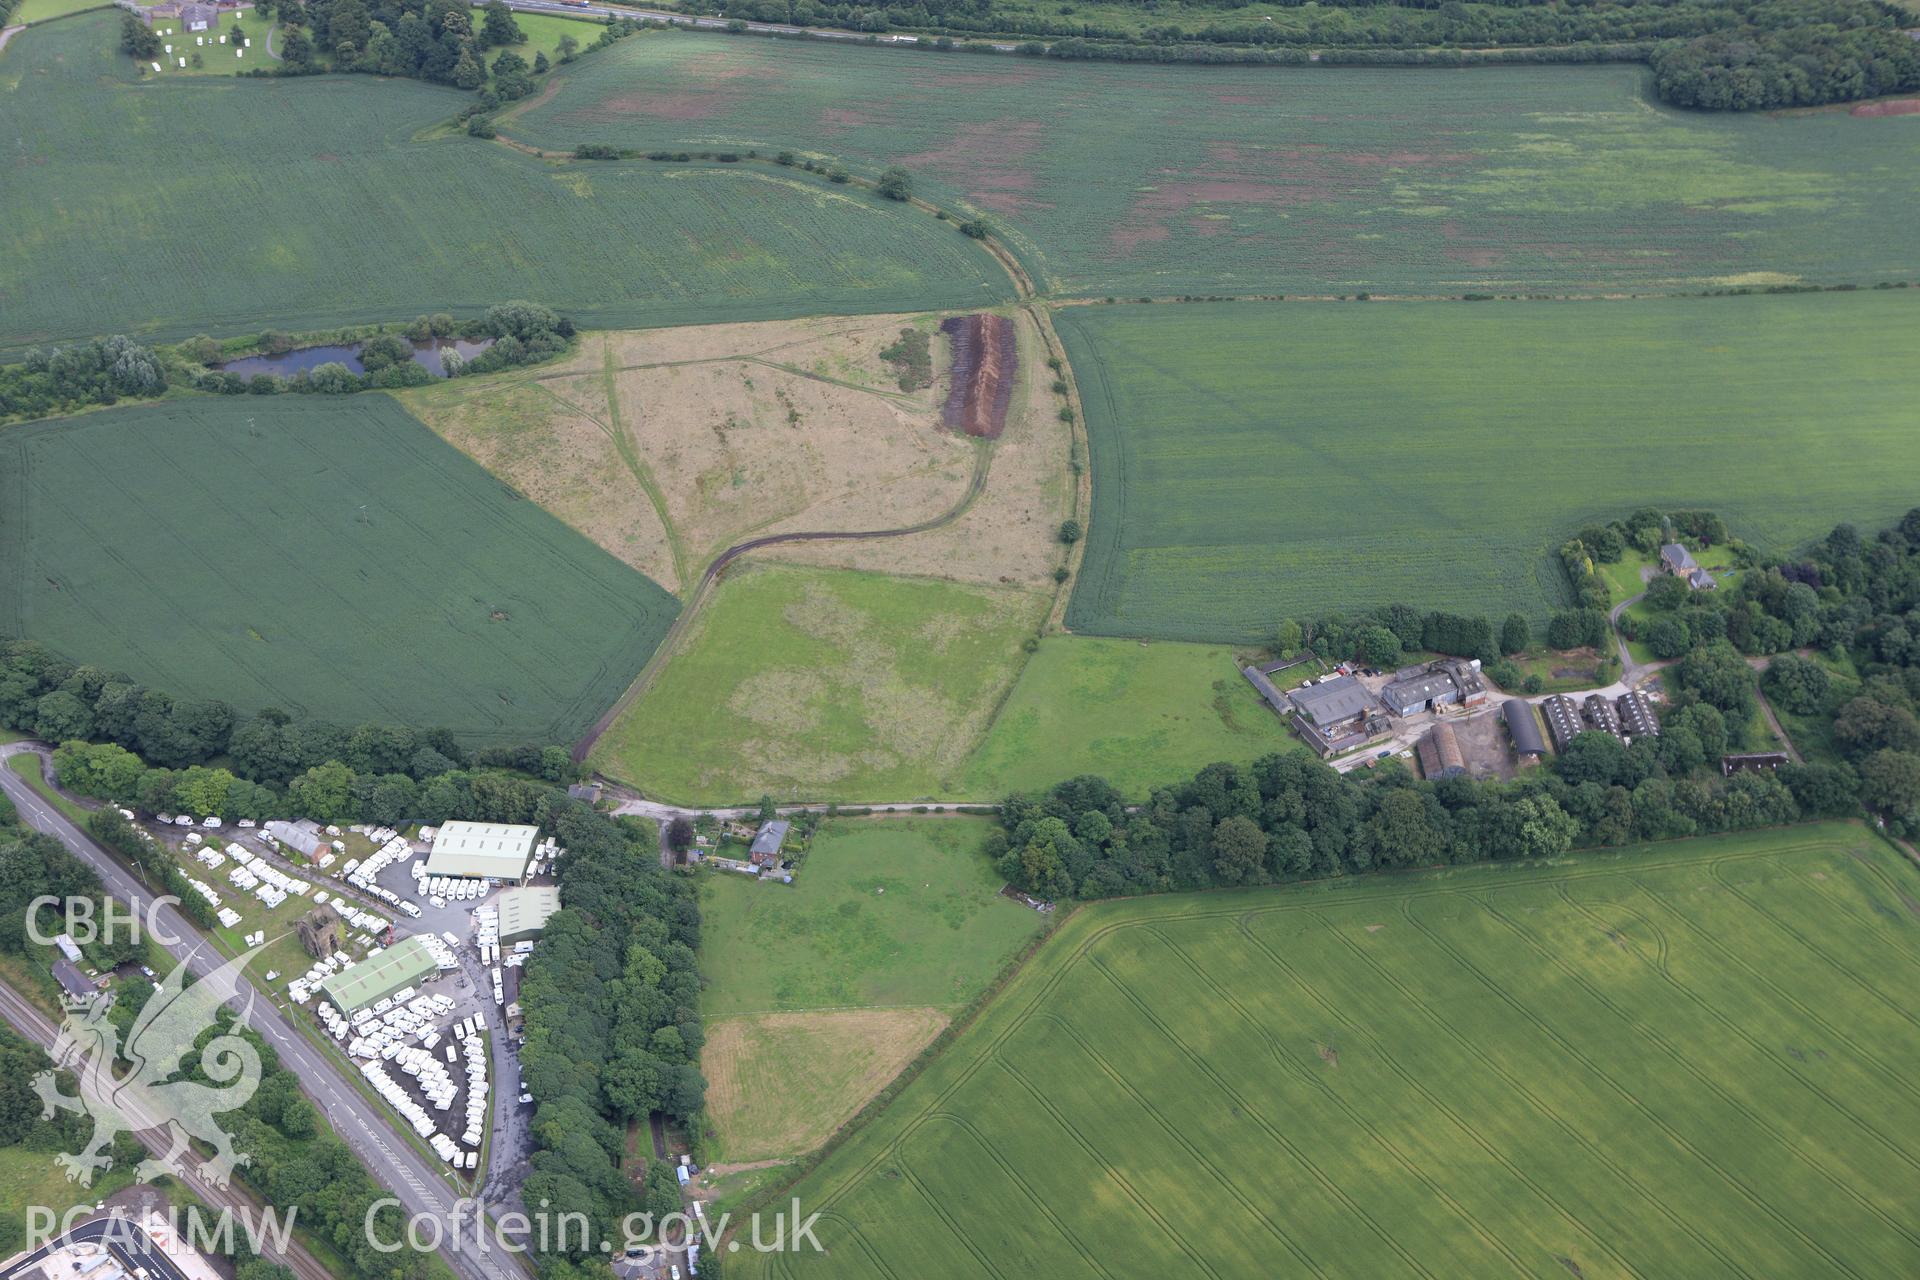 RCAHMW colour oblique aerial photograph of a section of Offa's Dyke north of Home Farm. Taken on 08 July 2009 by Toby Driver